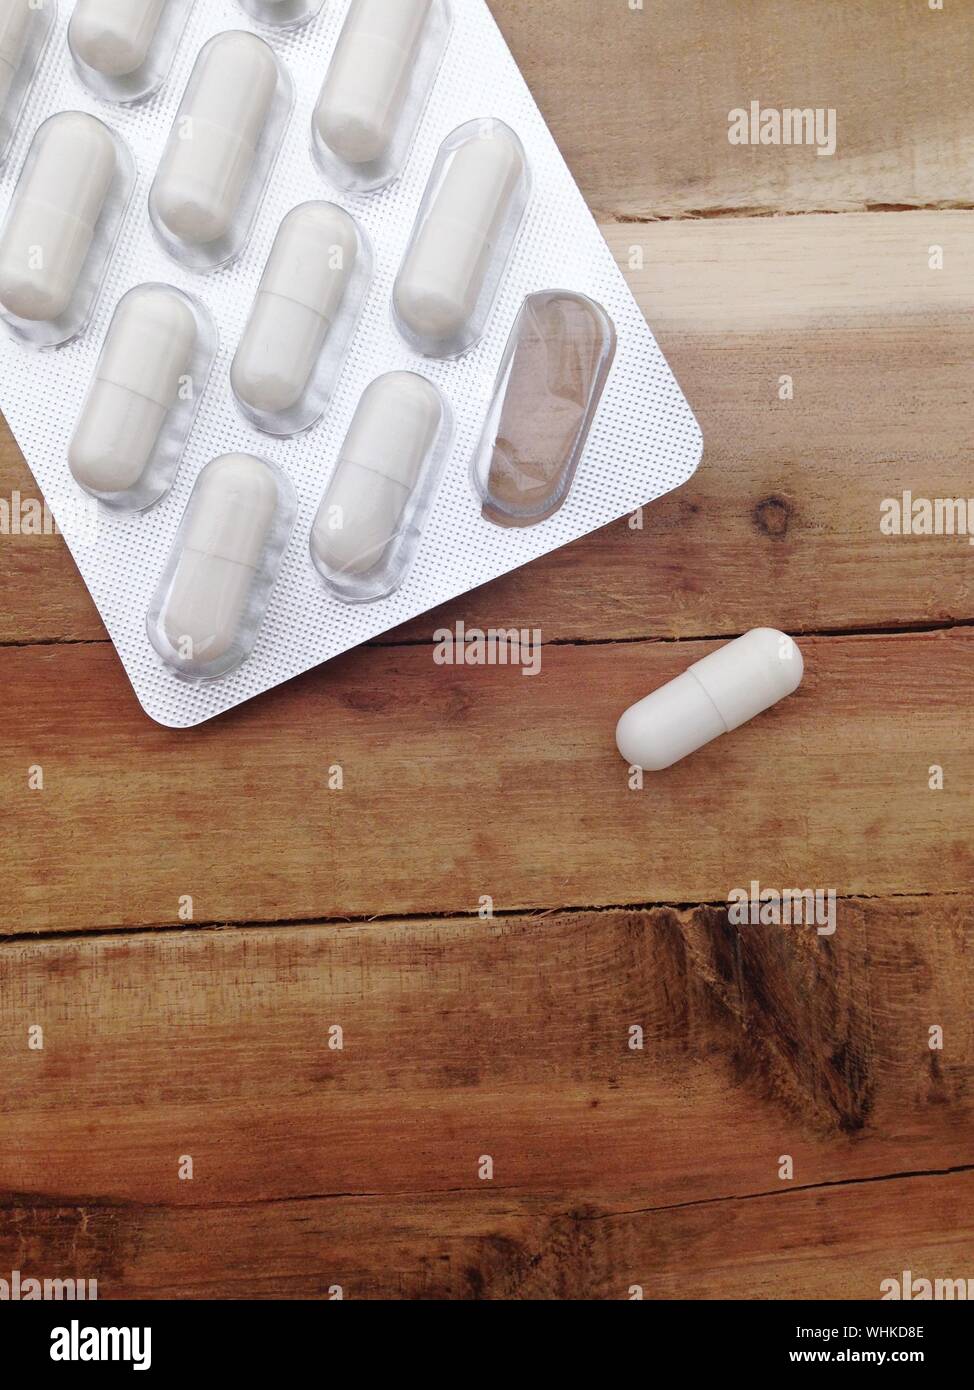 High Angle View Of Capsule Removed From Blister Pack On Wooden Table Stock Photo